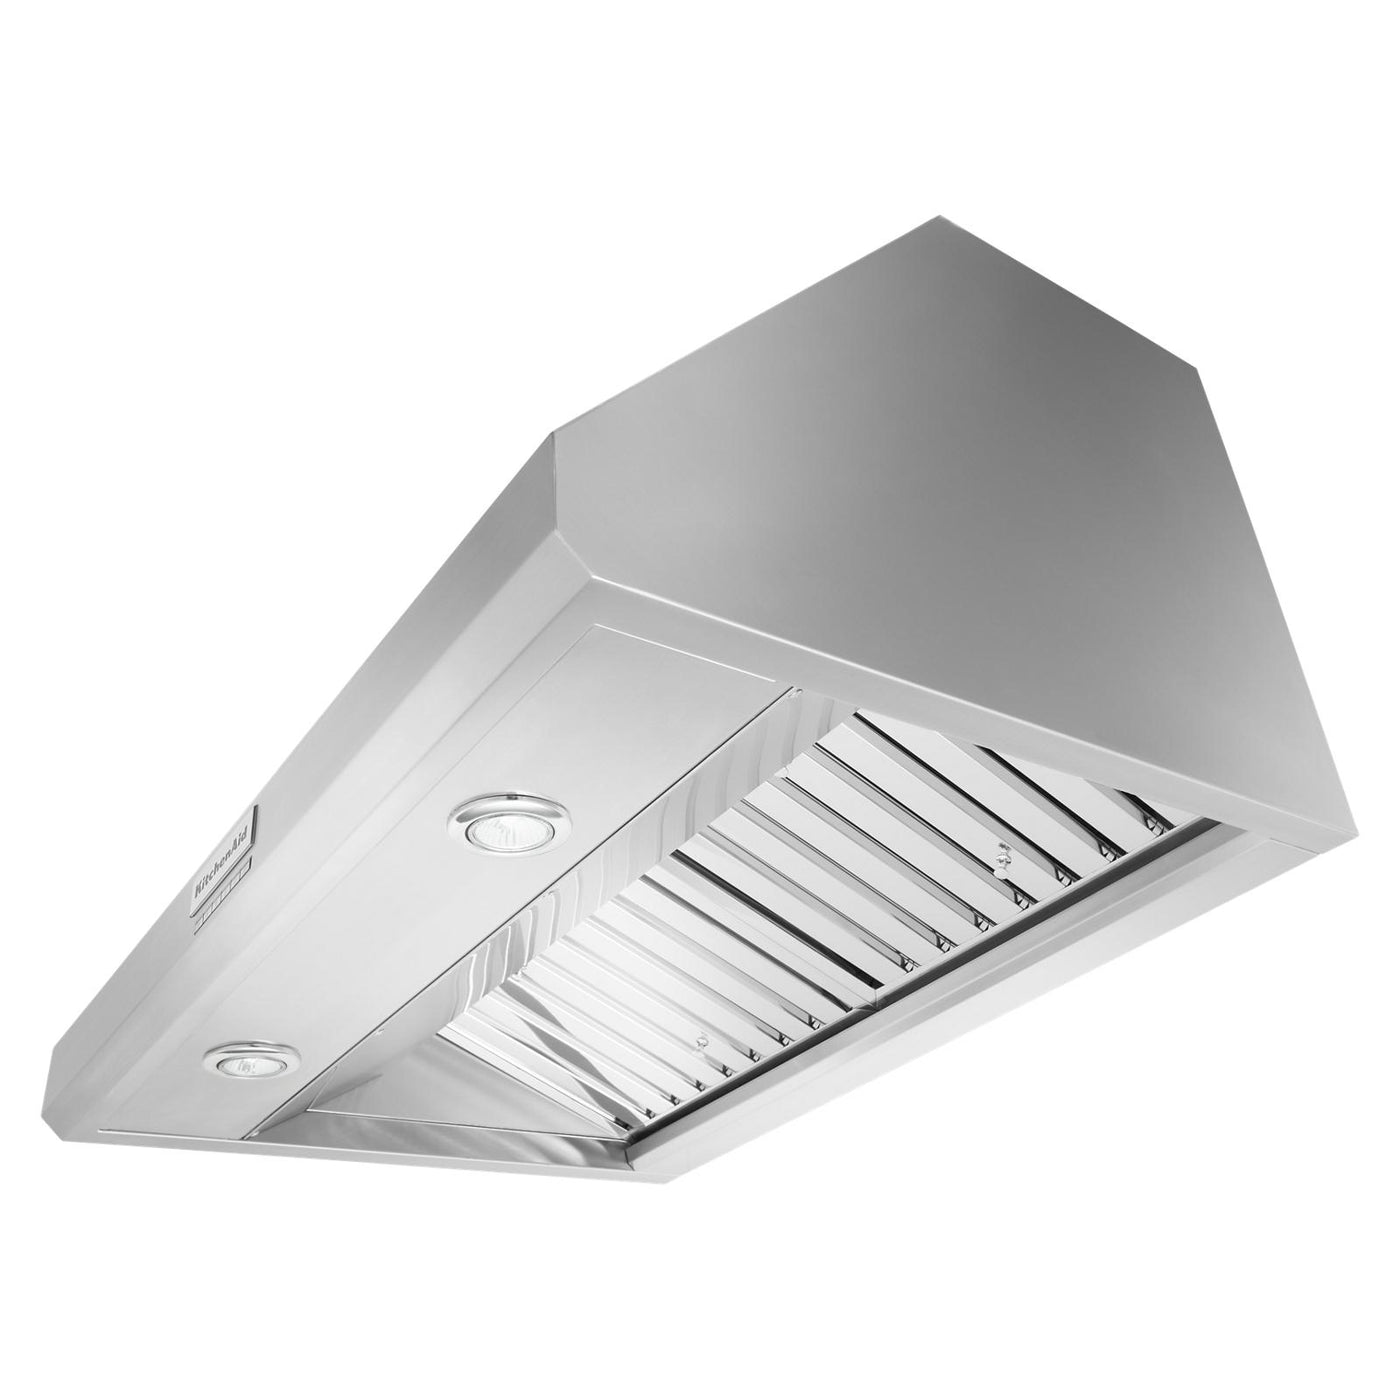 KitchenAid Stainless Steel 36" Commercial-Style Wall-Mount Canopy Range Hood - KVWC906KSS